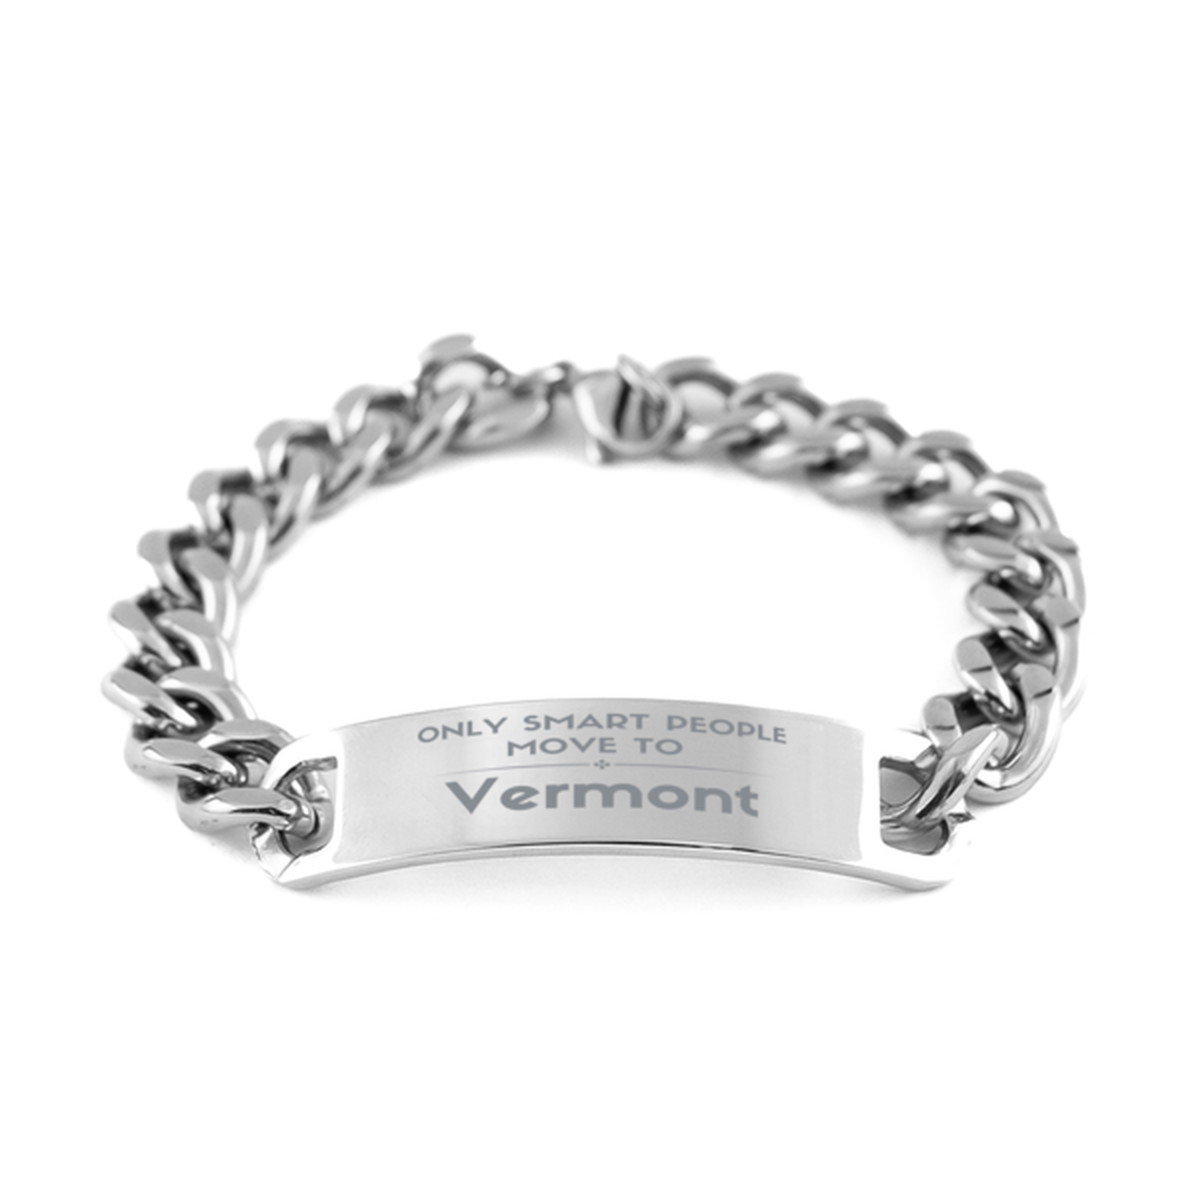 Only smart people move to Vermont Cuban Chain Stainless Steel Bracelet, Gag Gifts For Vermont, Move to Vermont Gifts for Friends Coworker Funny Saying Quote